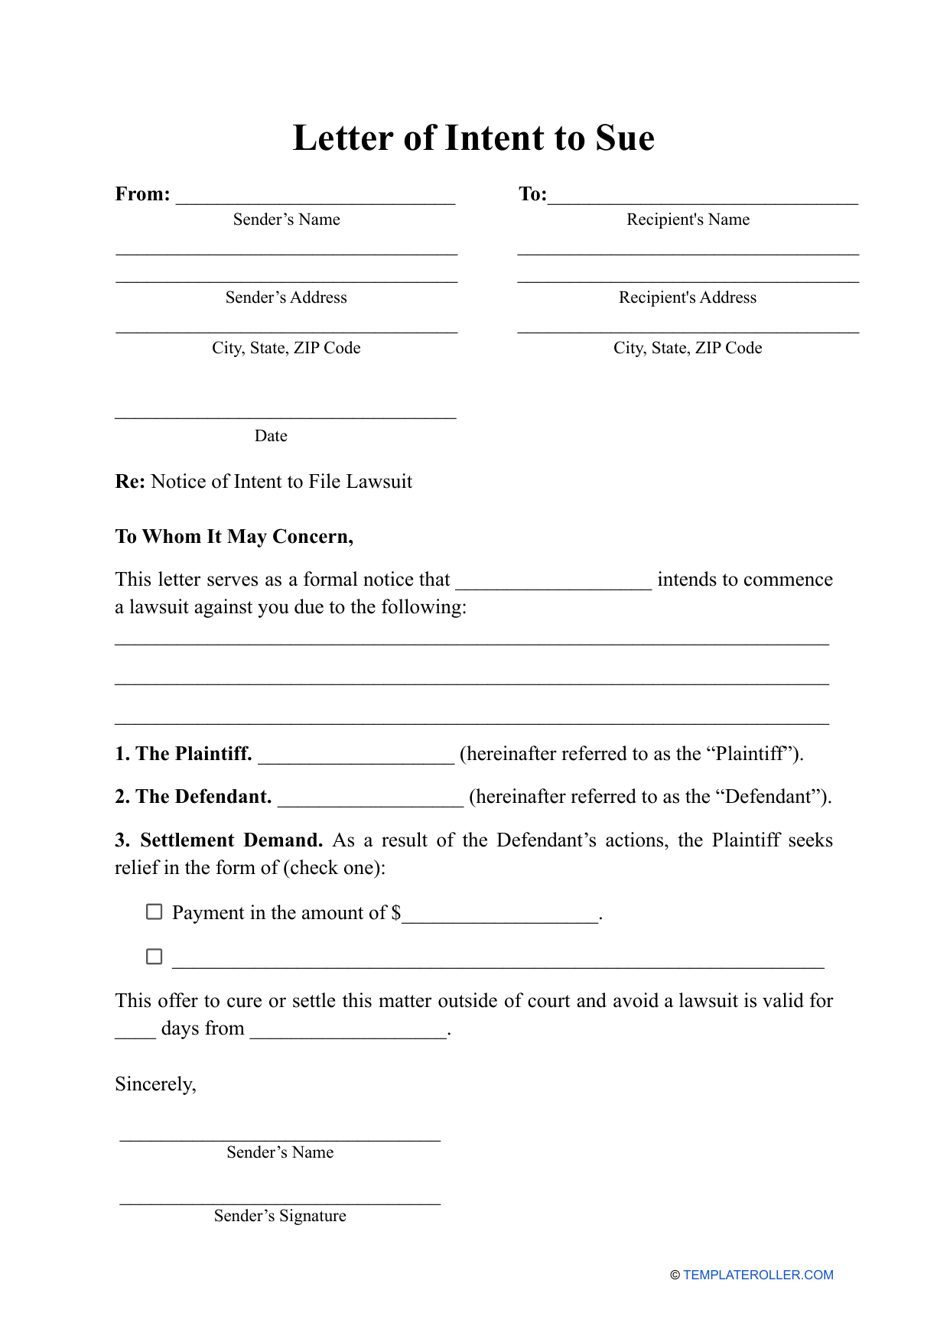 Letter of Intent to Sue Template Download Printable PDF | Templateroller